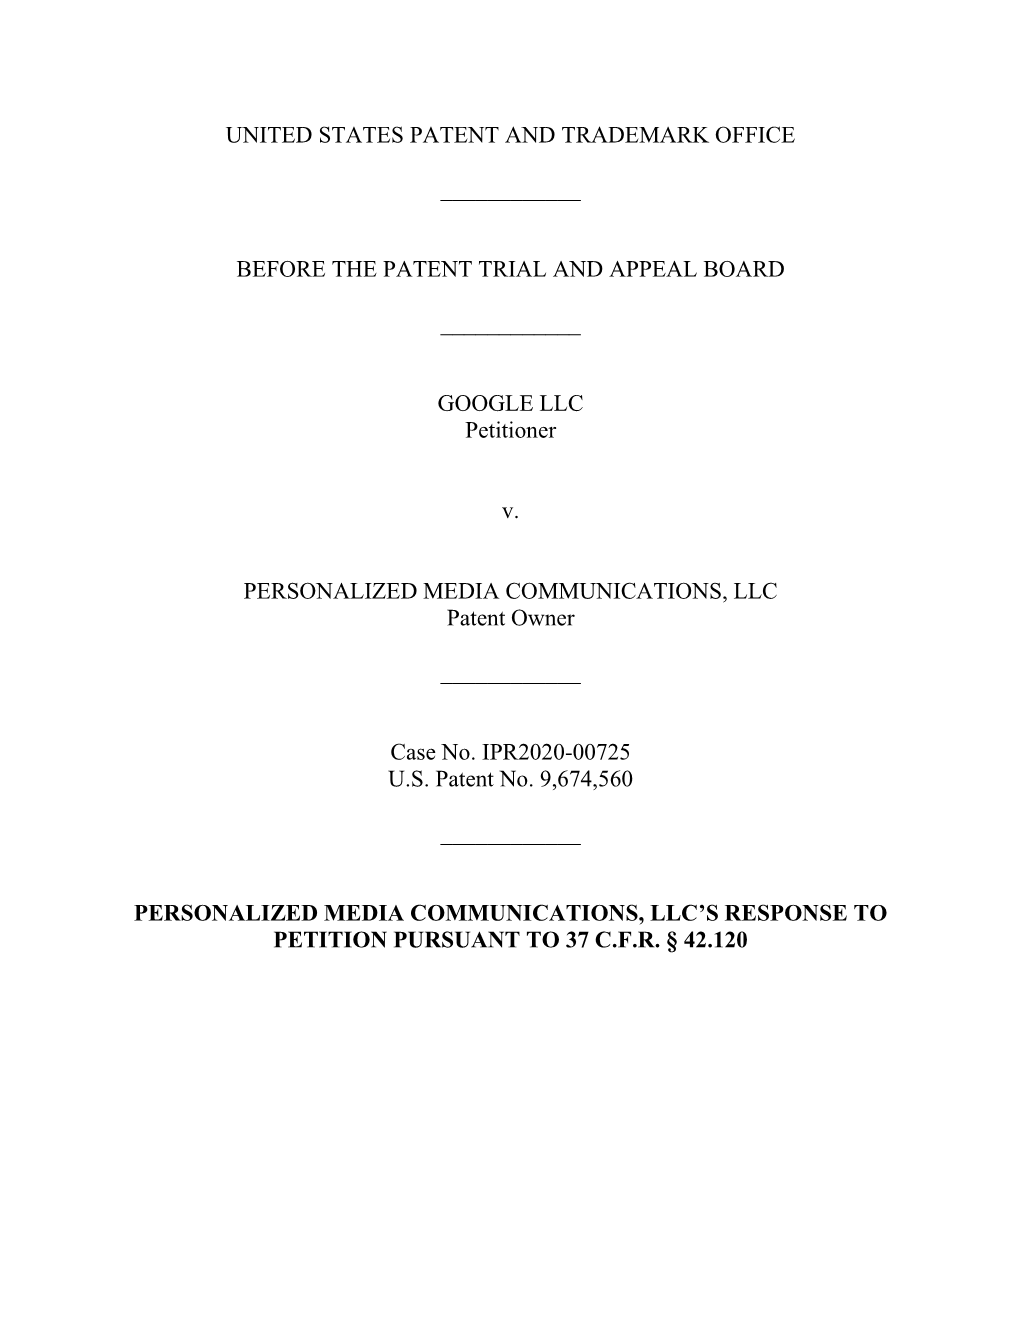 Before the Patent Trial and Appeal Board